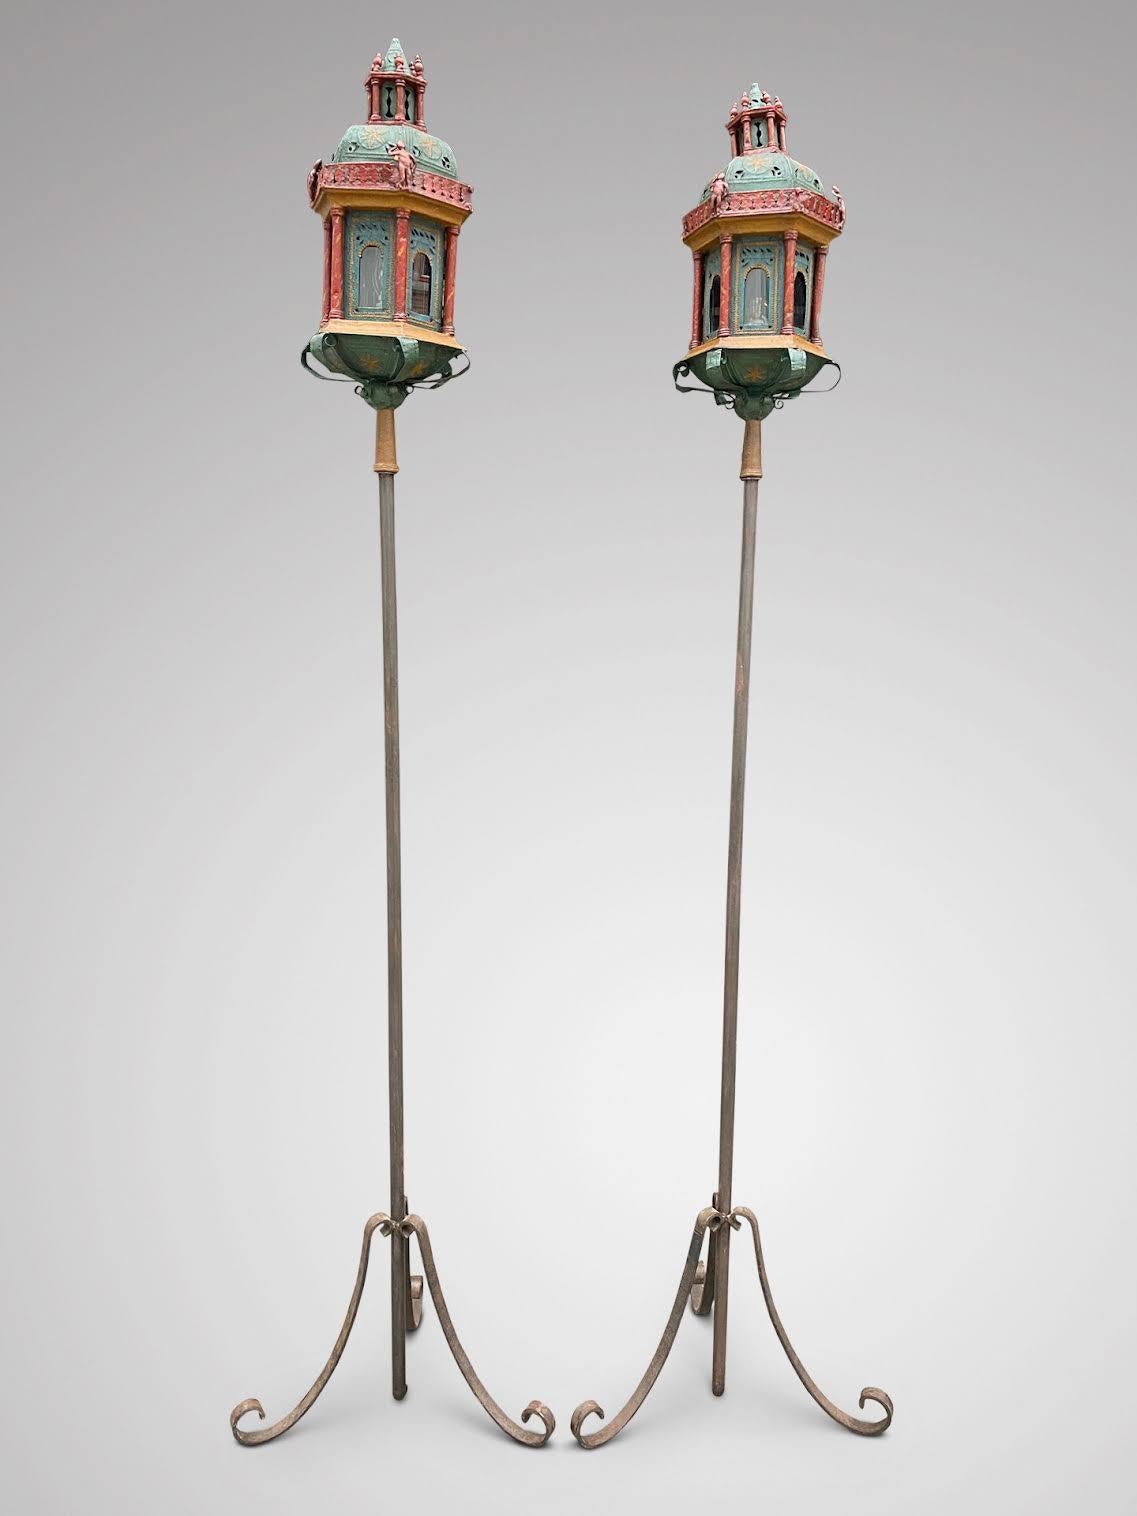 A fabulous pair of 19th century hand painted and hand crafted Venetian gondola tôle lantern torcheres, each with hexagonal lantern adorned with decorations, figures and scrolling foliage, on wrought iron stand scrolling tripod base. Newly